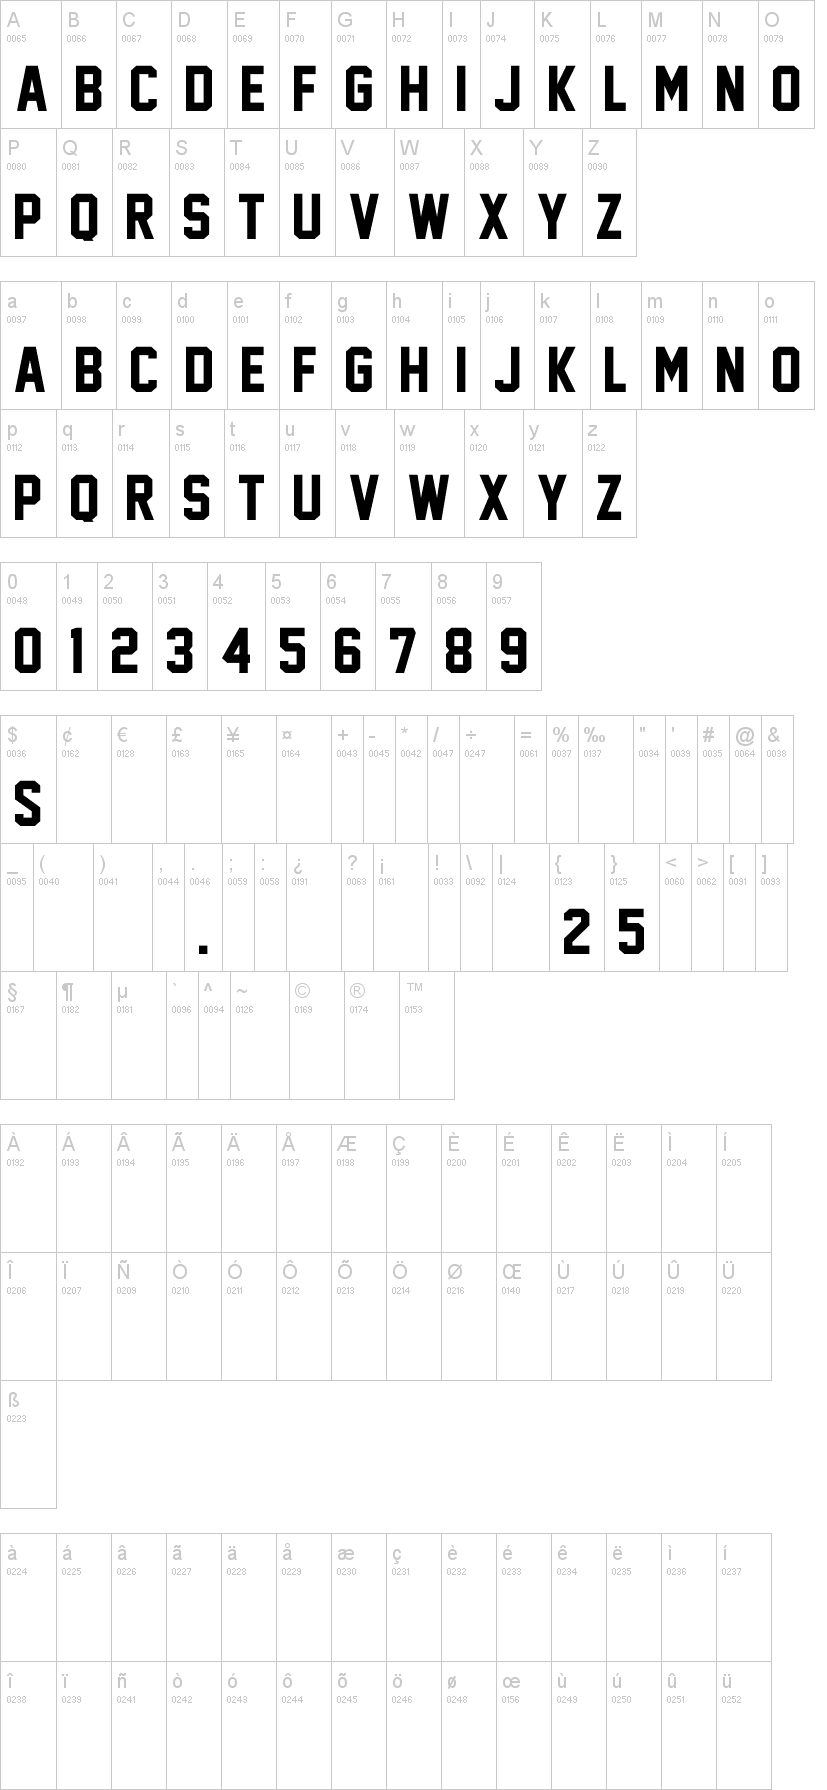 font used for jerseys